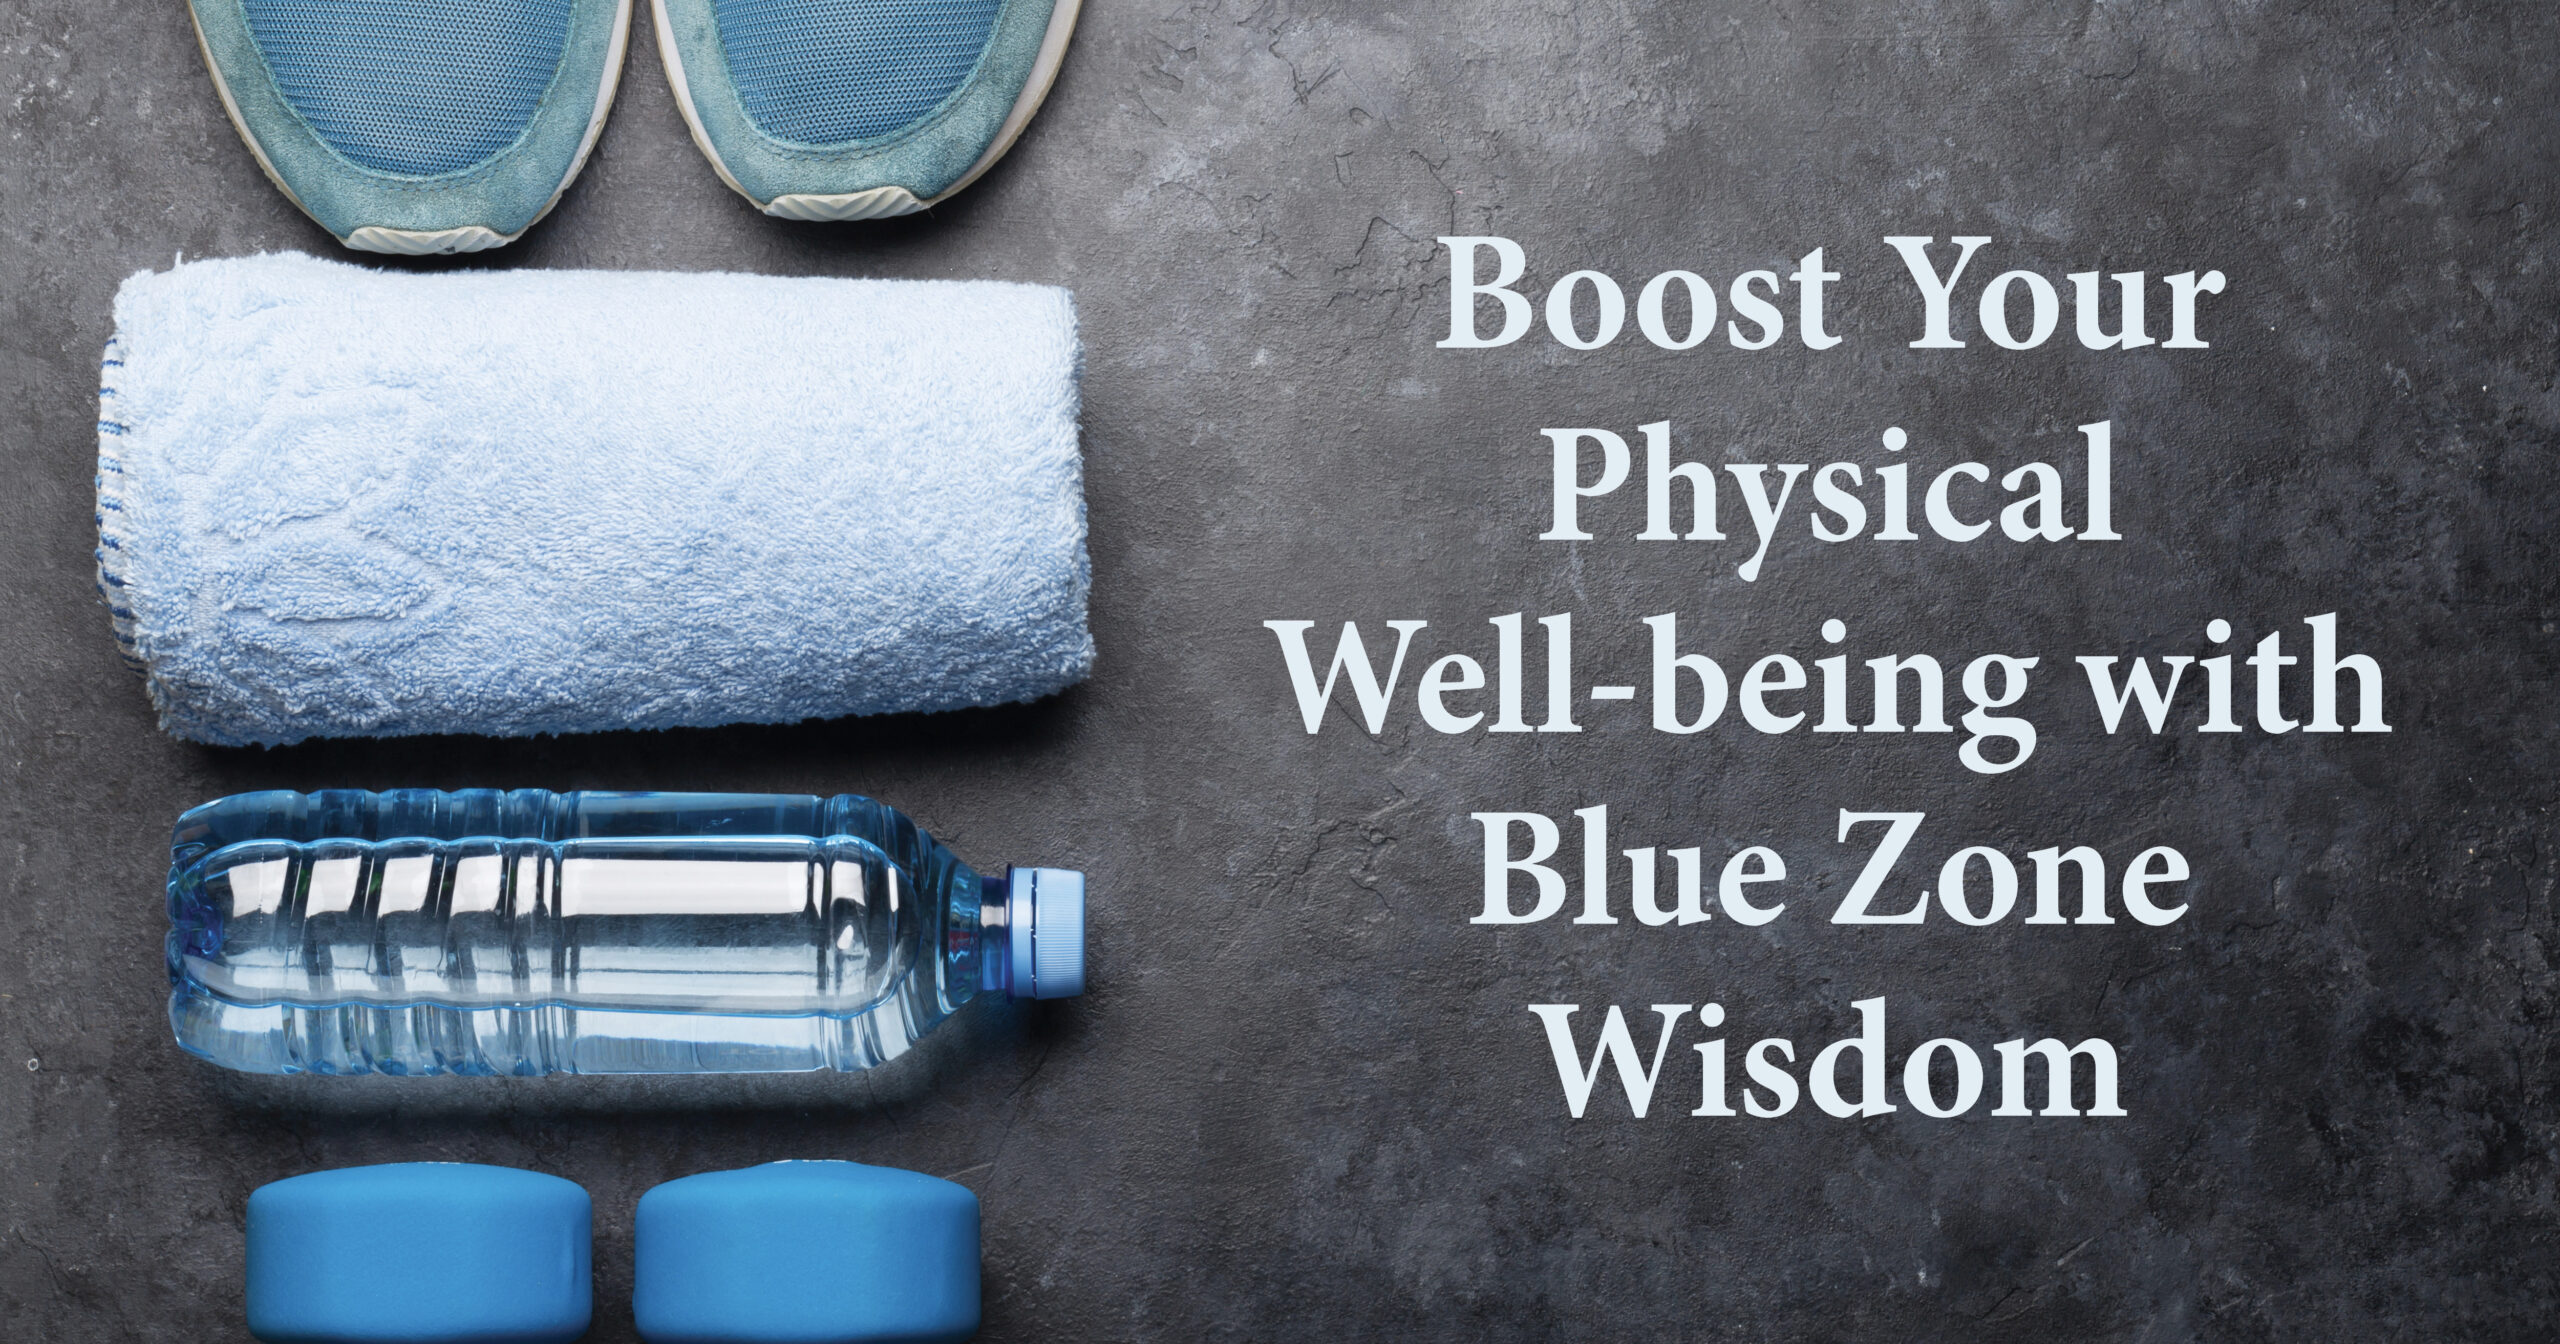 Boost Your Physical Well-being with Blue Zone Wisdom